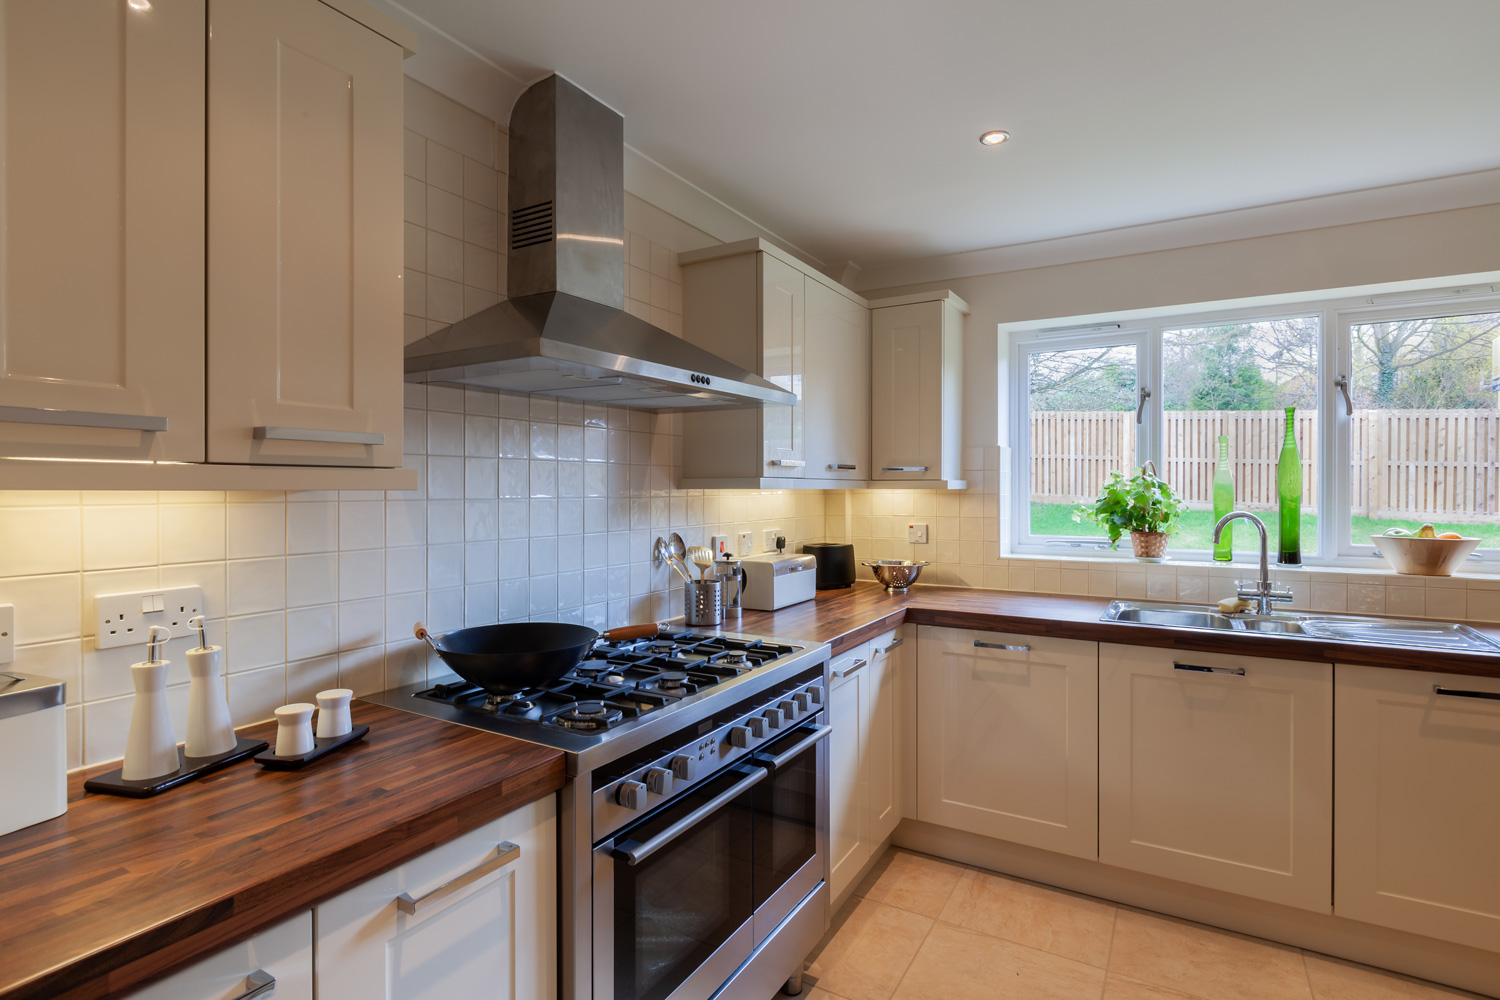 Luxury modern fitted kitchen within new home staged for sale with twin oven stainless steel range